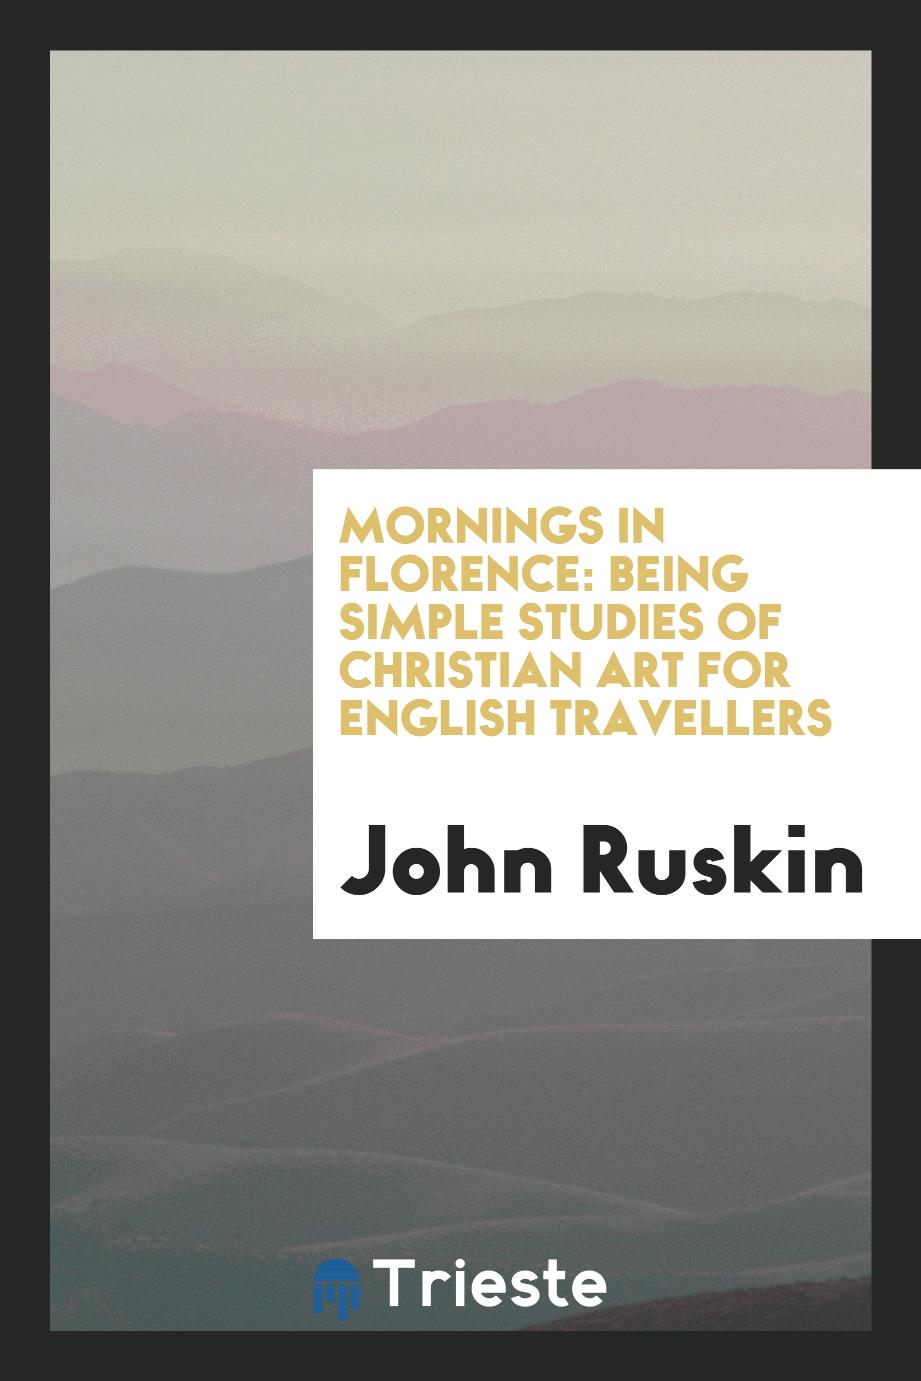 Mornings in Florence: being simple studies of Christian art for English travellers